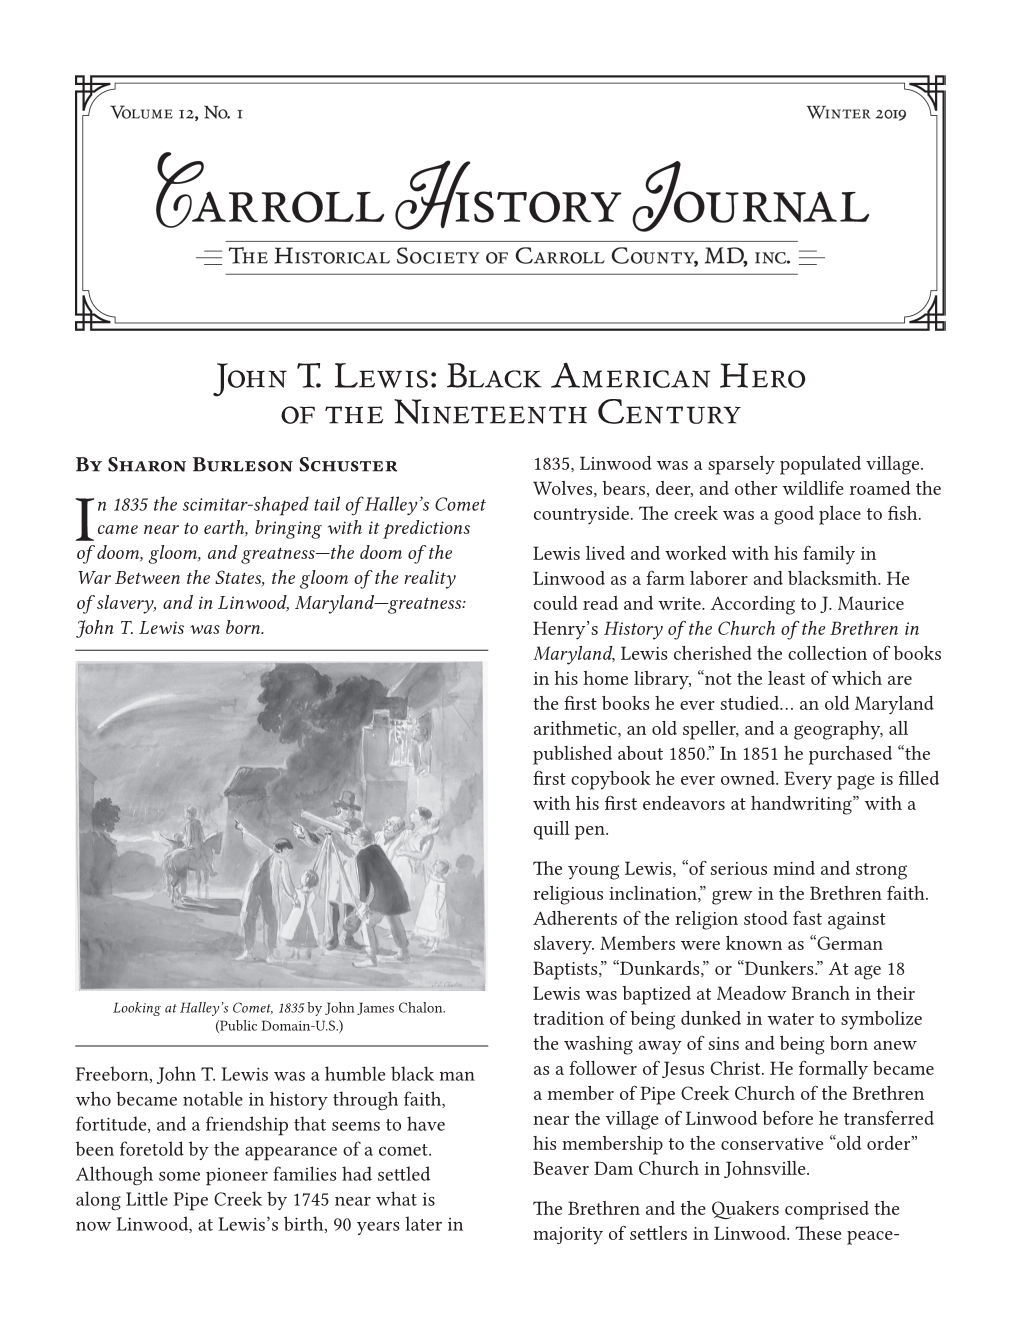 John T. Lewis: Black American Hero of the Nineteenth Century by Sharon Burleson Schuster 1835, Linwood Was a Sparsely Populated Village